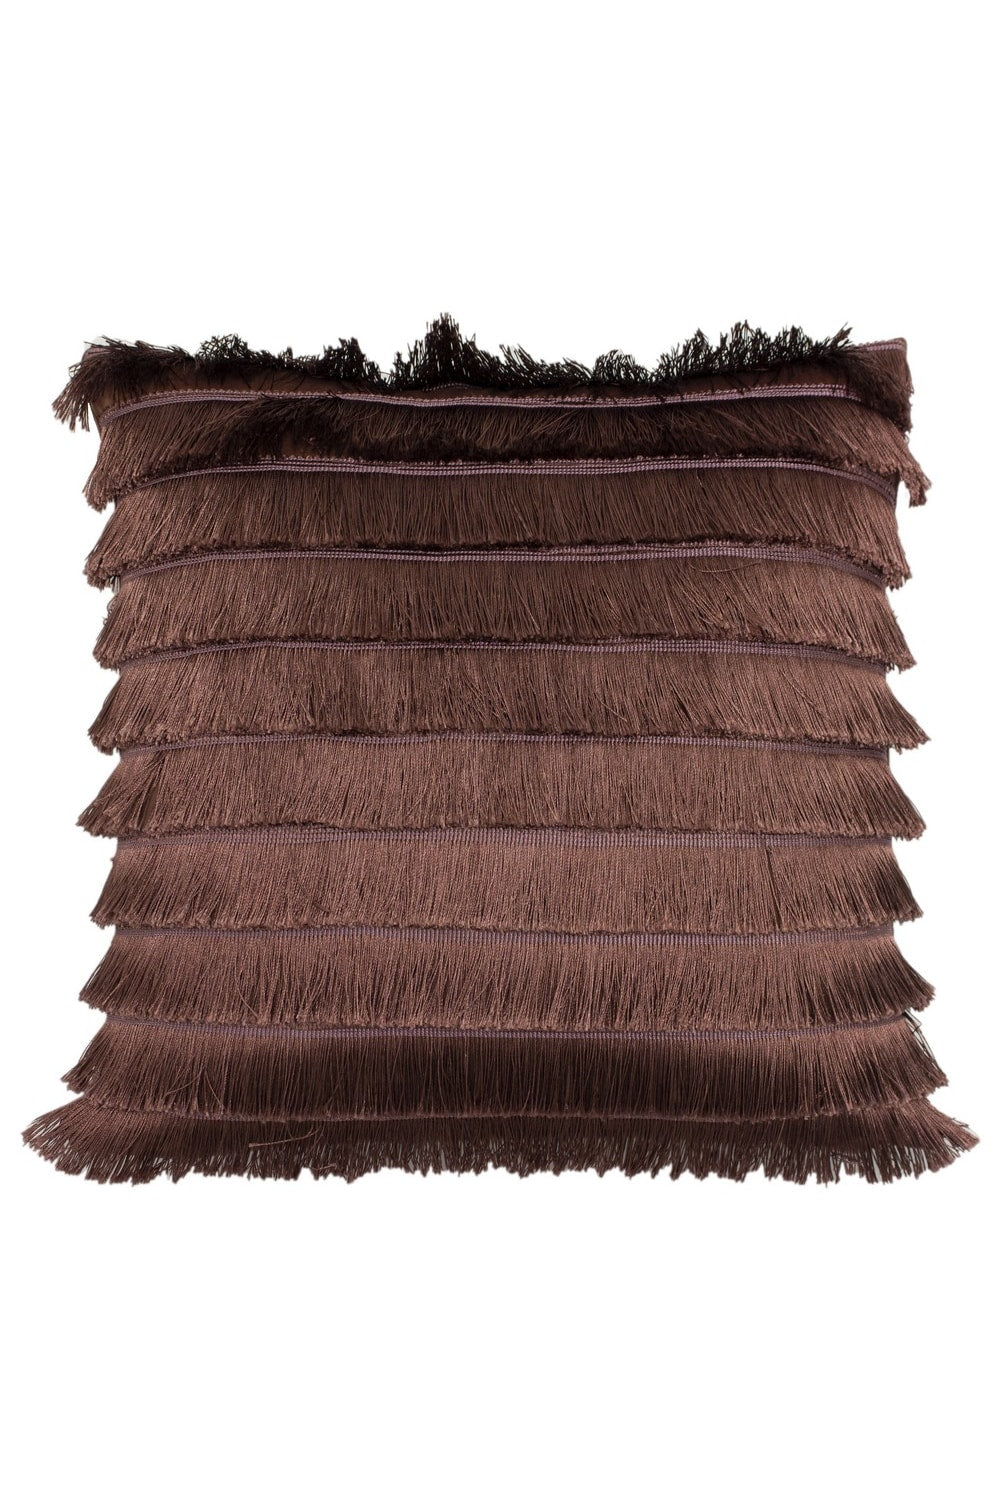 Furn Flicker Tiered Fringe Cushion Cover